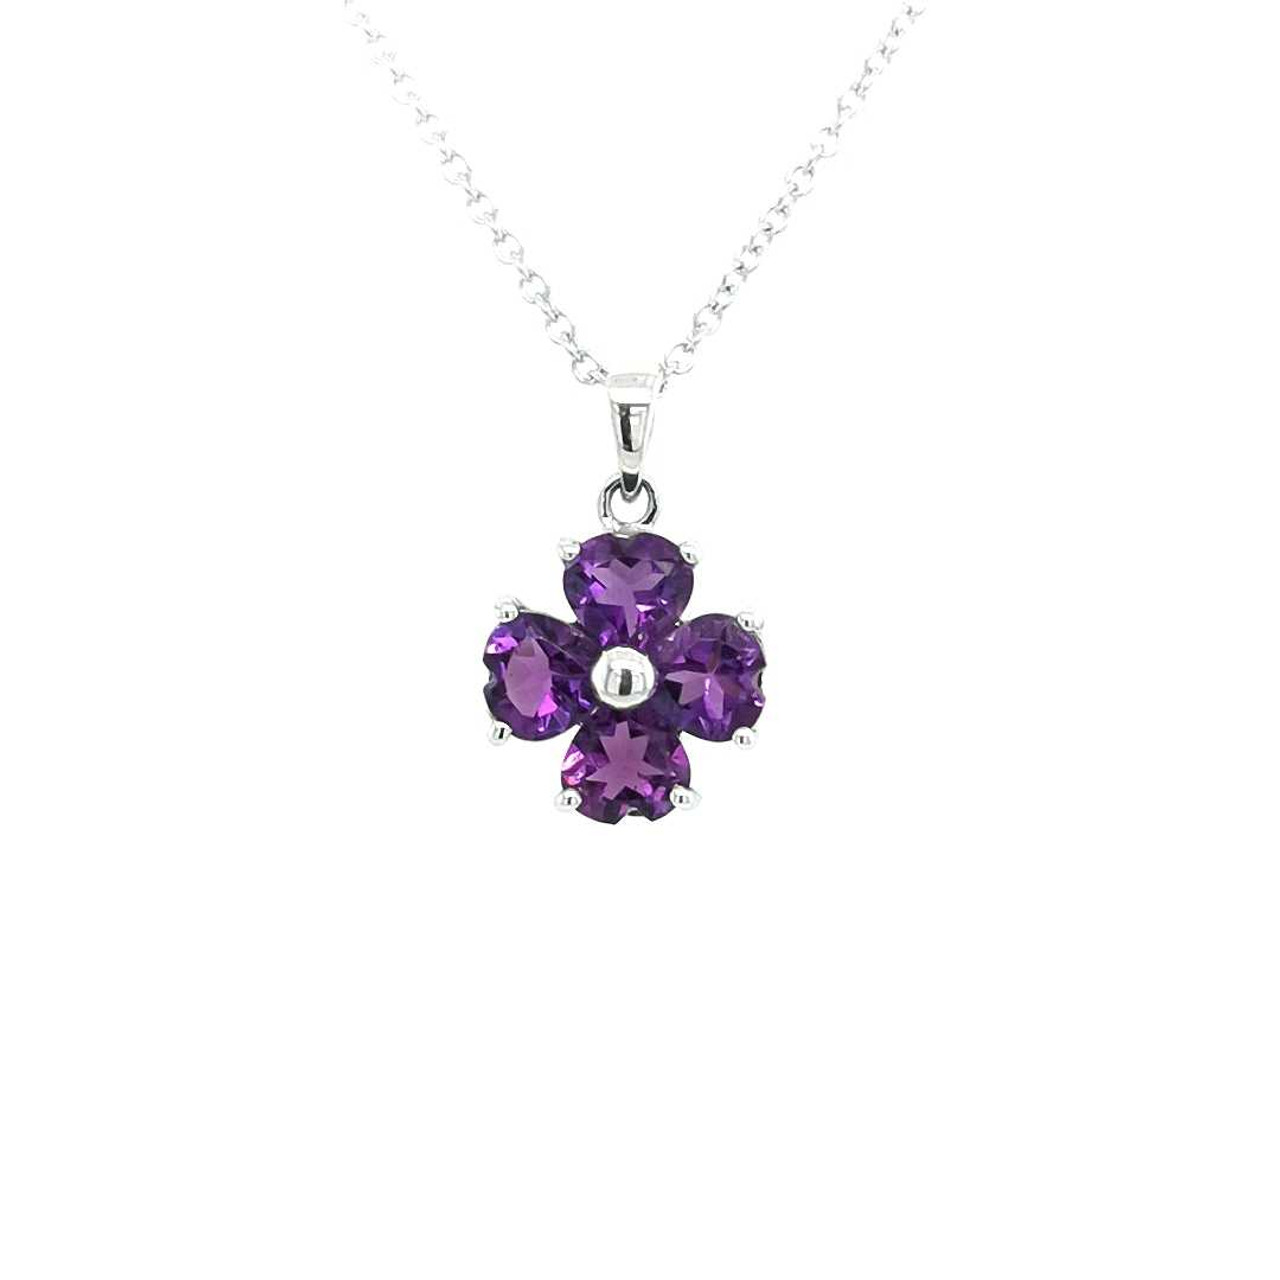 Amethyst Pendant in 14K White Gold set with Diamonds - Luxury Watches and  Fine Jewelry